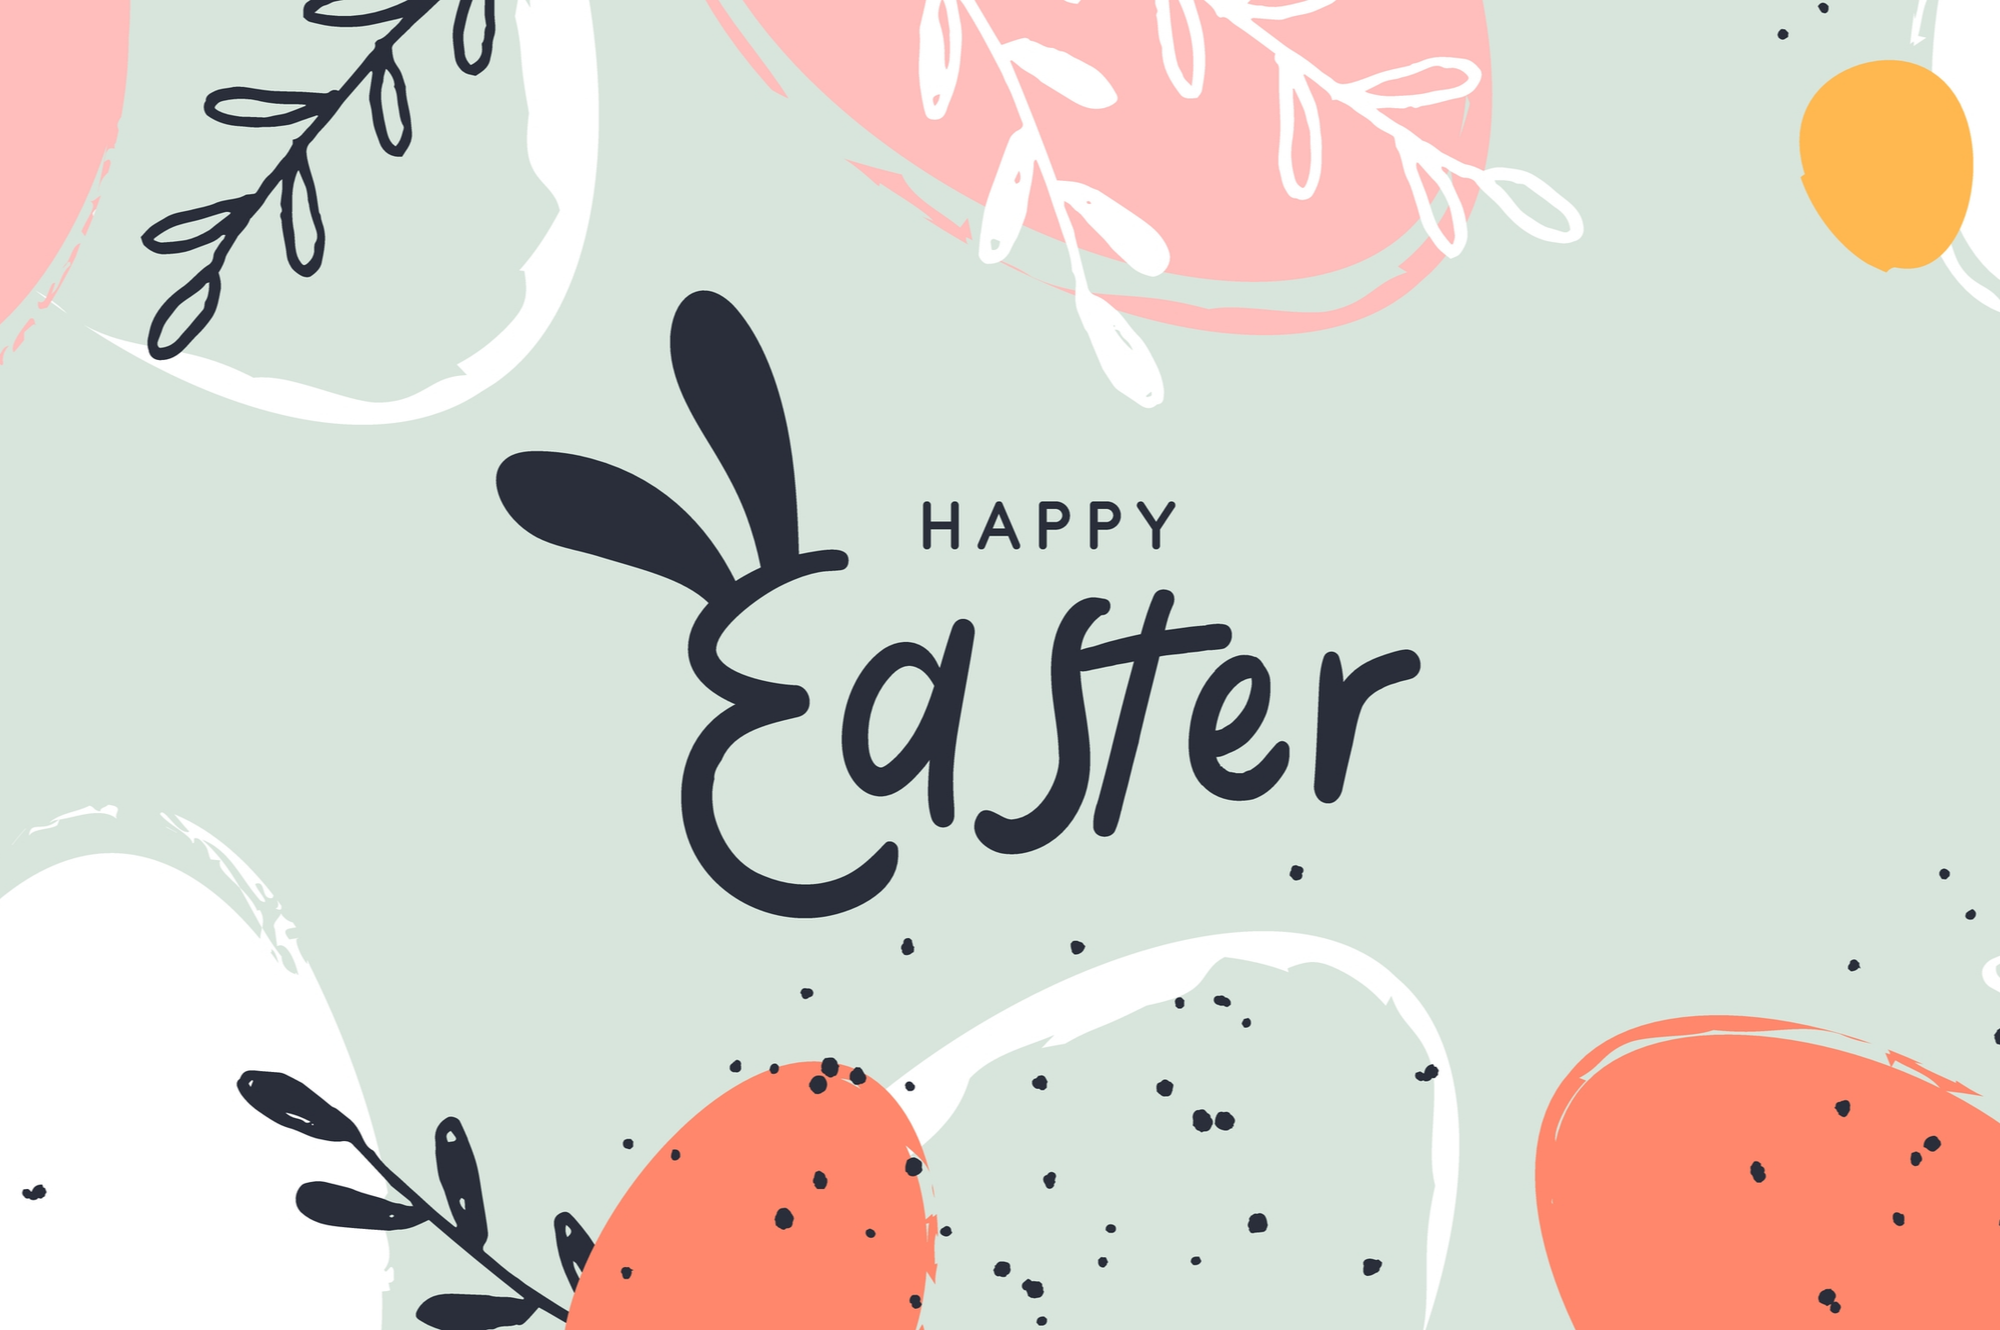 Warmest wishes to you this Easter season